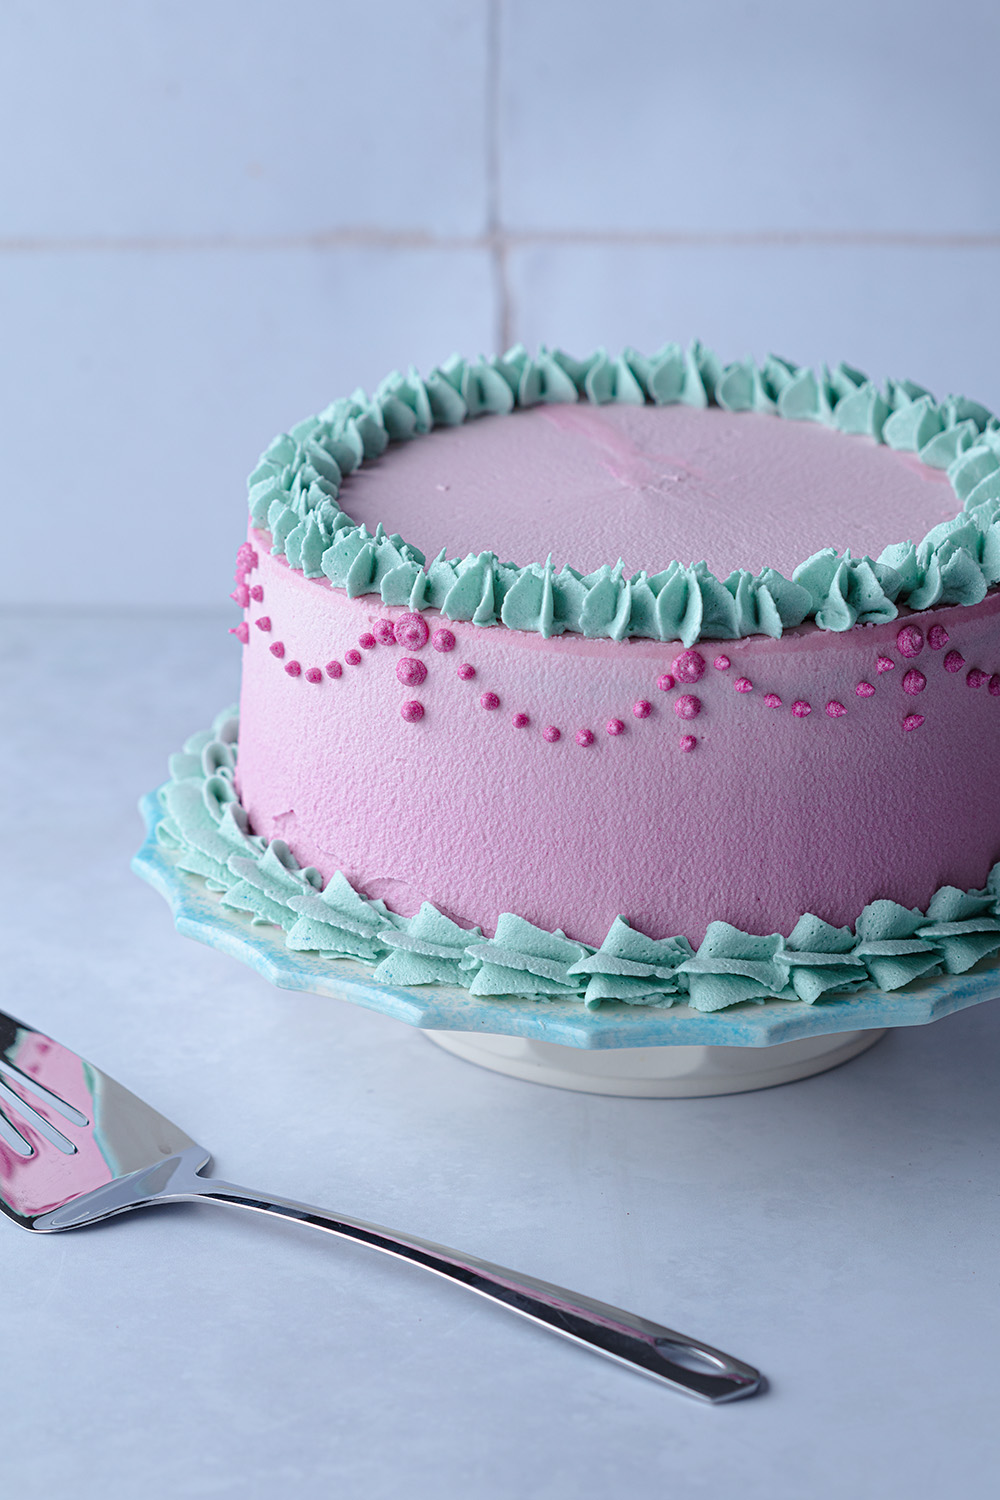 the completed nutella cake decorated with pink and teal frosting